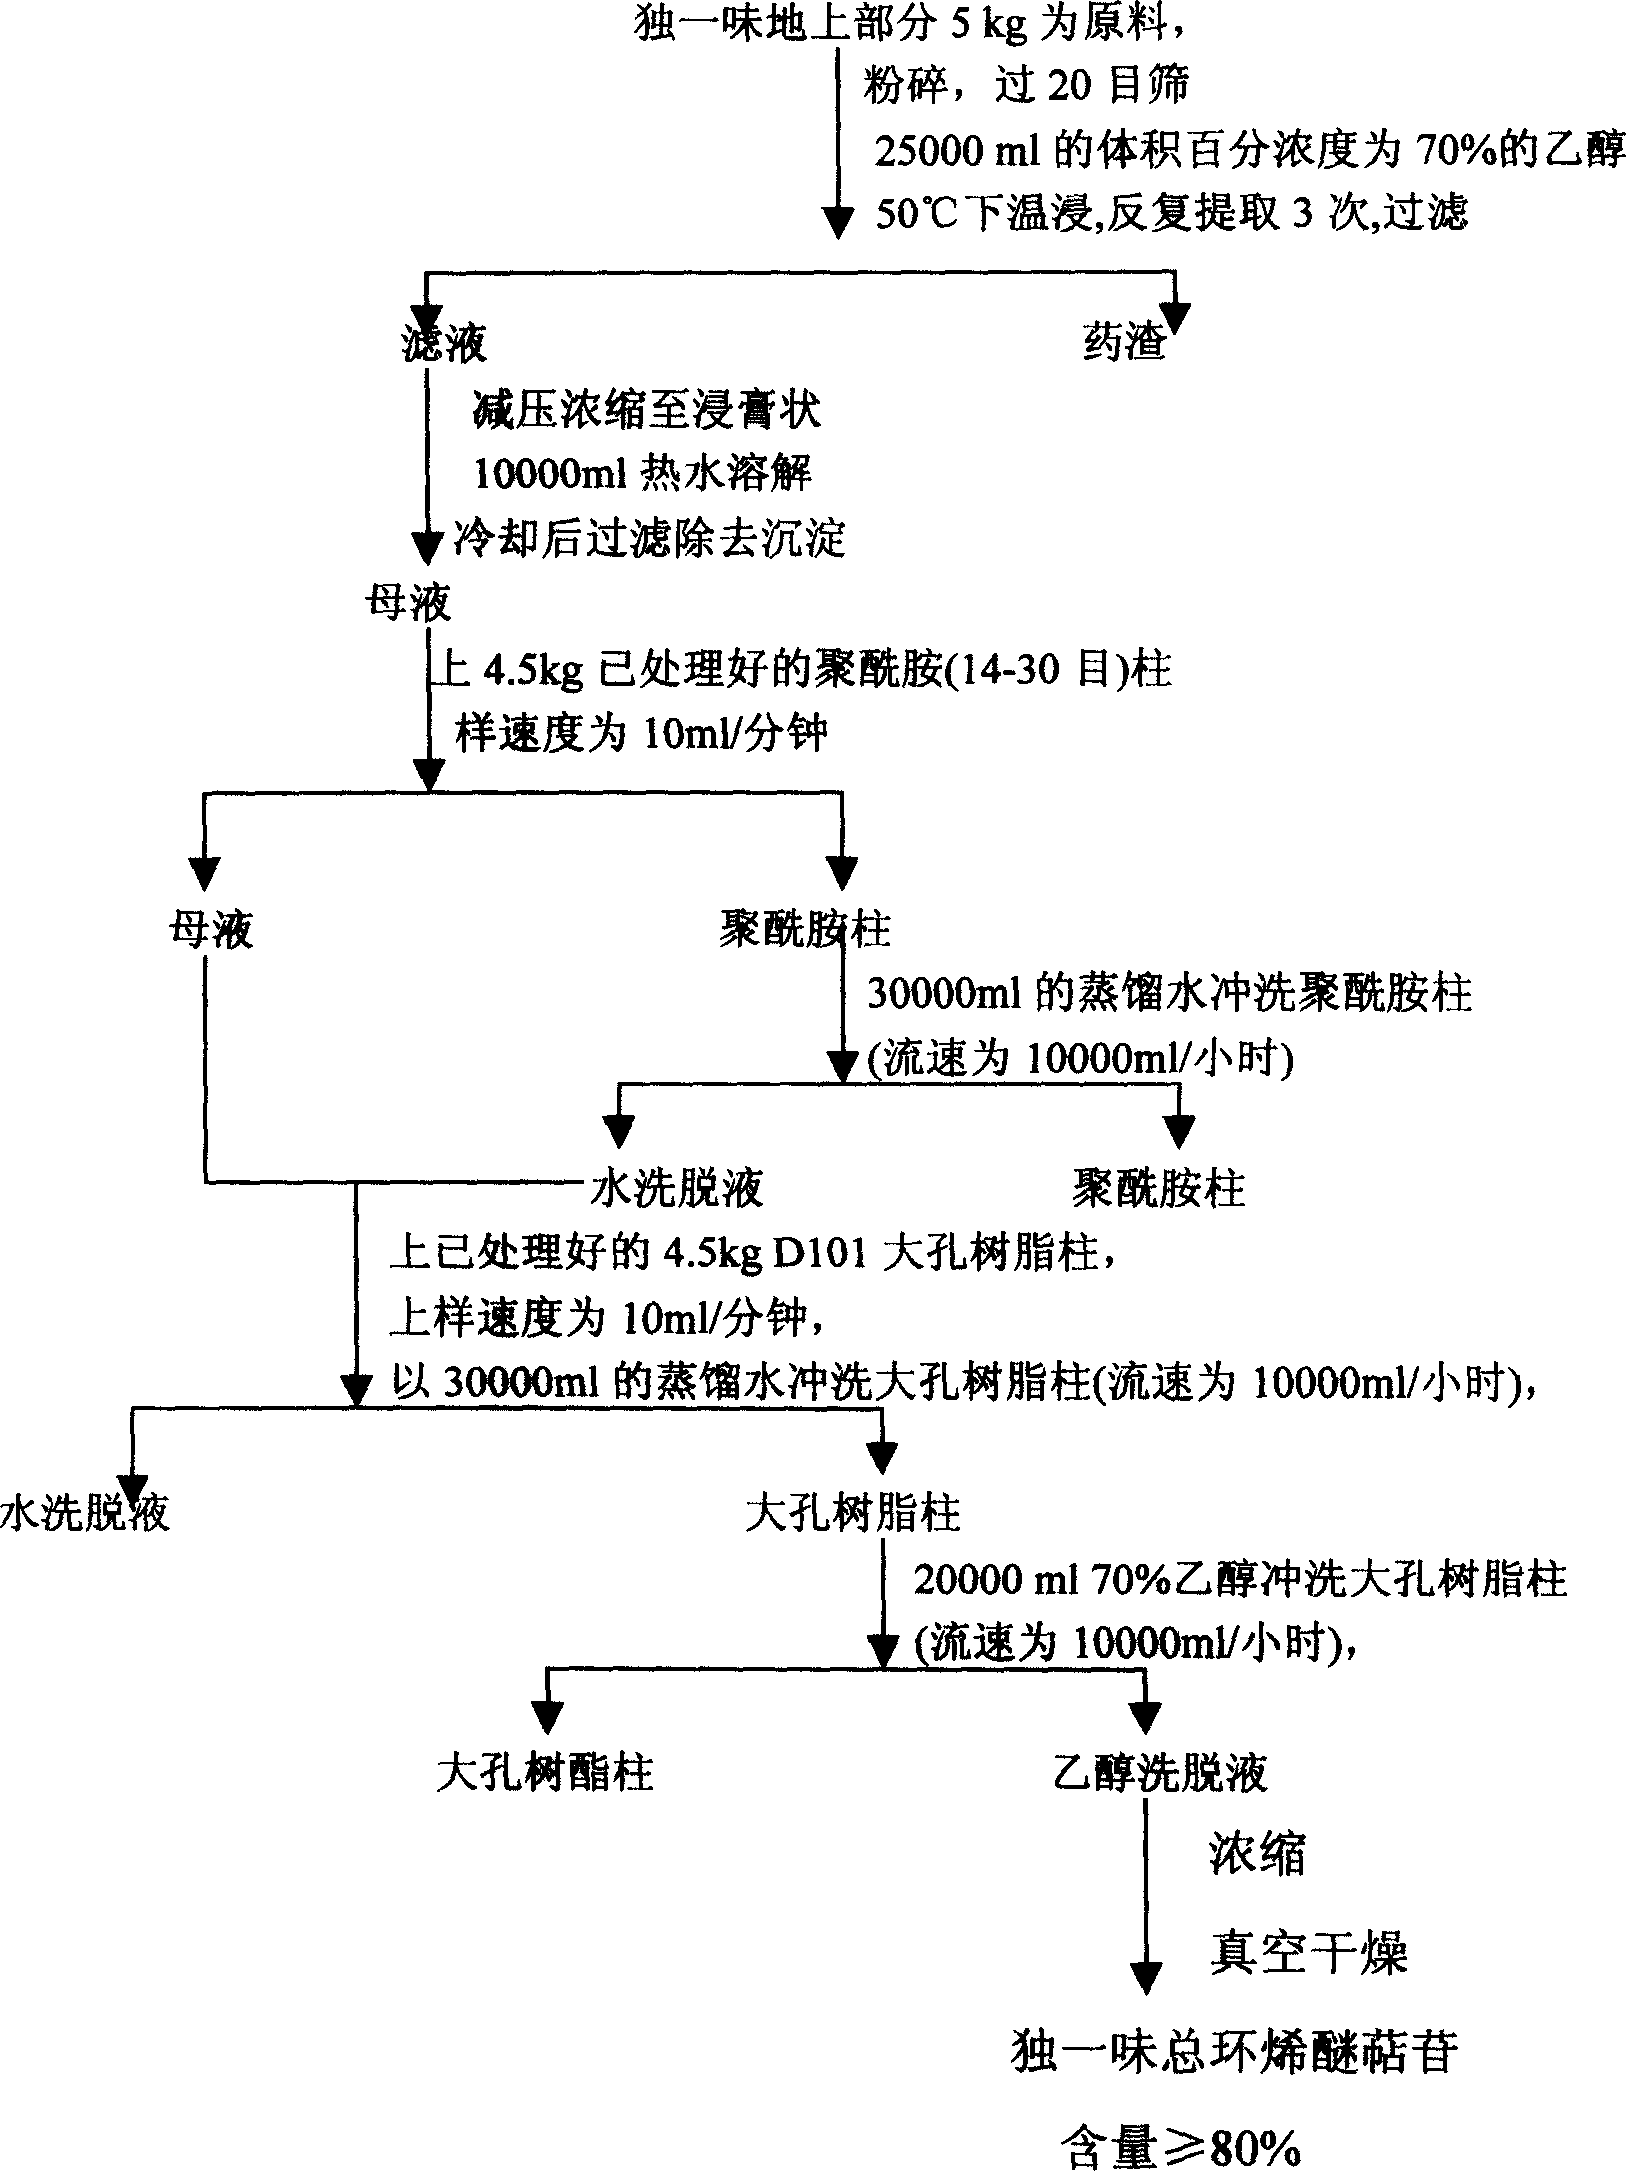 Method for extracting general iridoid glycoside from 'Duyiwei' of Tibet medicine and application